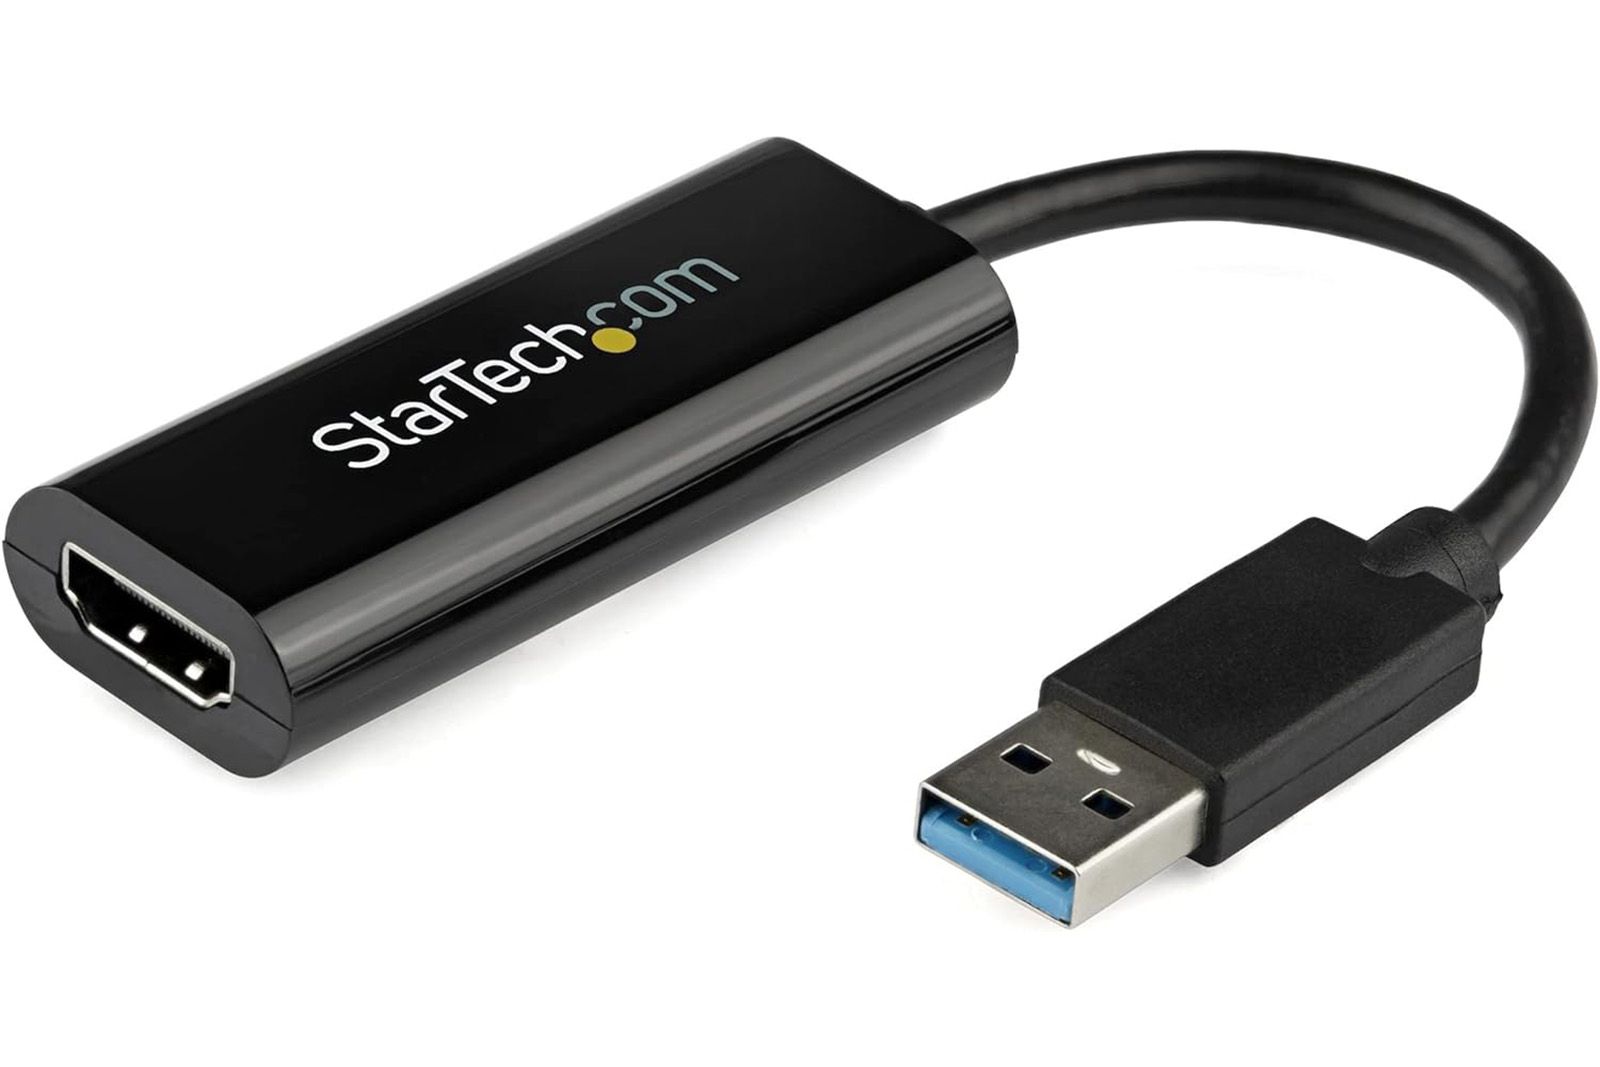 Cable Matters SuperSpeed USB 3.0 to HDMI Adapter (USB to HDMI Adapter) for  Windows up to 1440p in Black